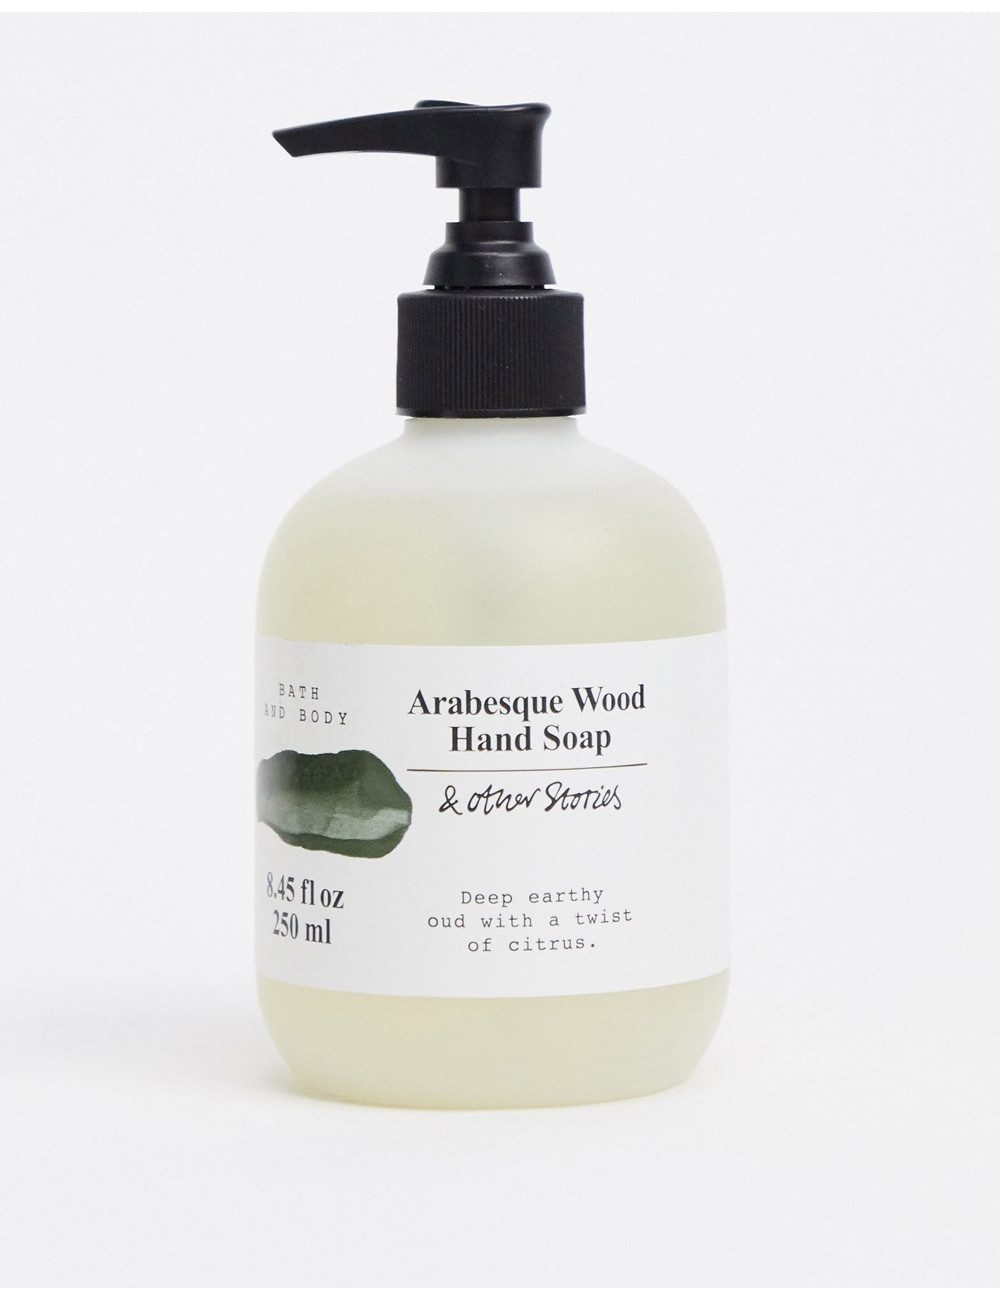 & Other Stories hand soap...